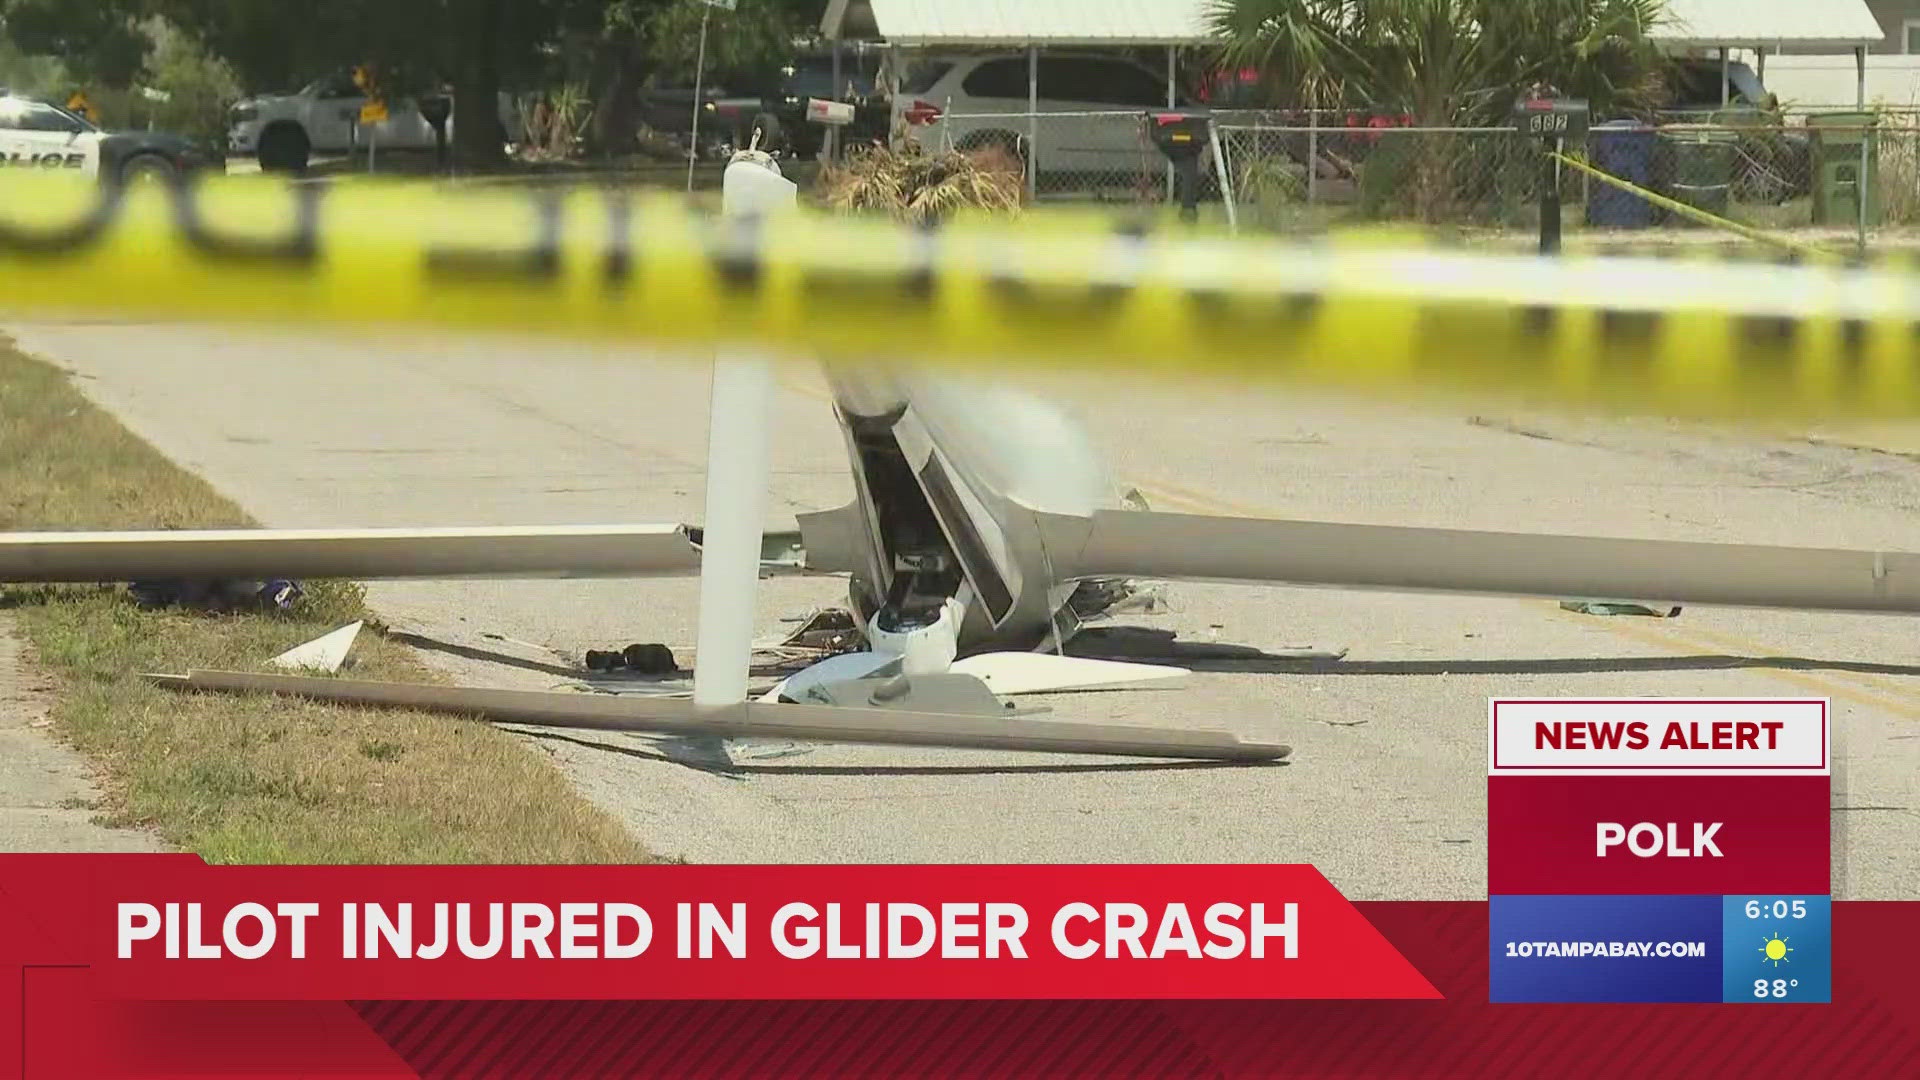 Photos show a small white glider lying upside down across the road with its front end damaged.